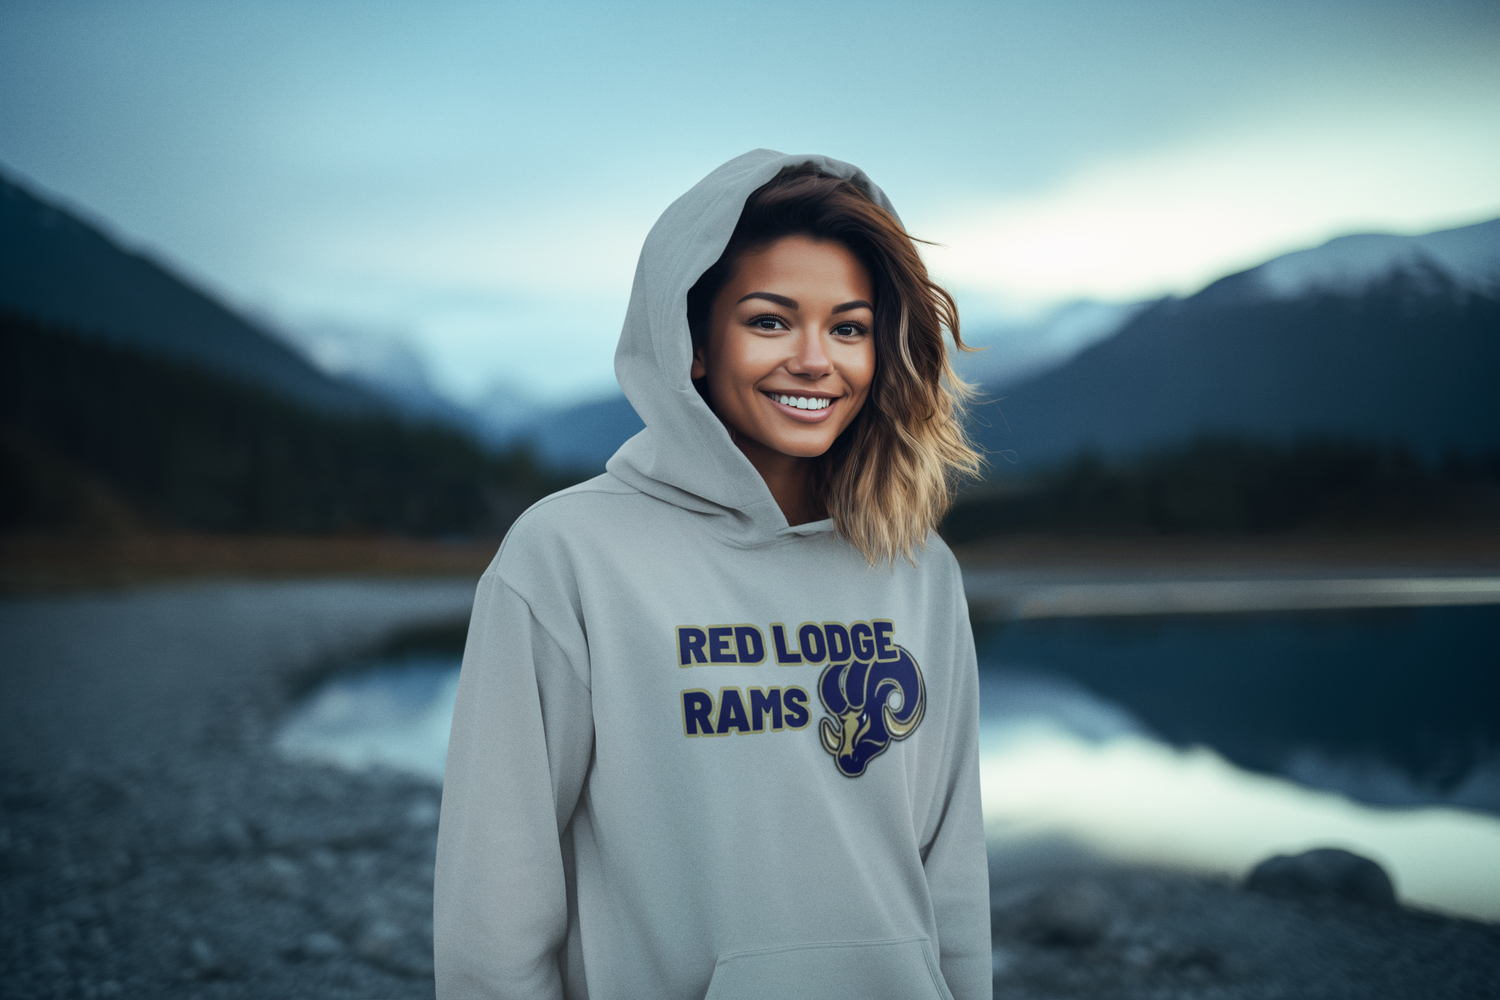 Get ready to show your school spirit with Class C Merch! Whether you need cozy hoodies for Fall football games or wicking tanks for Spring track meets, we've got you covered.